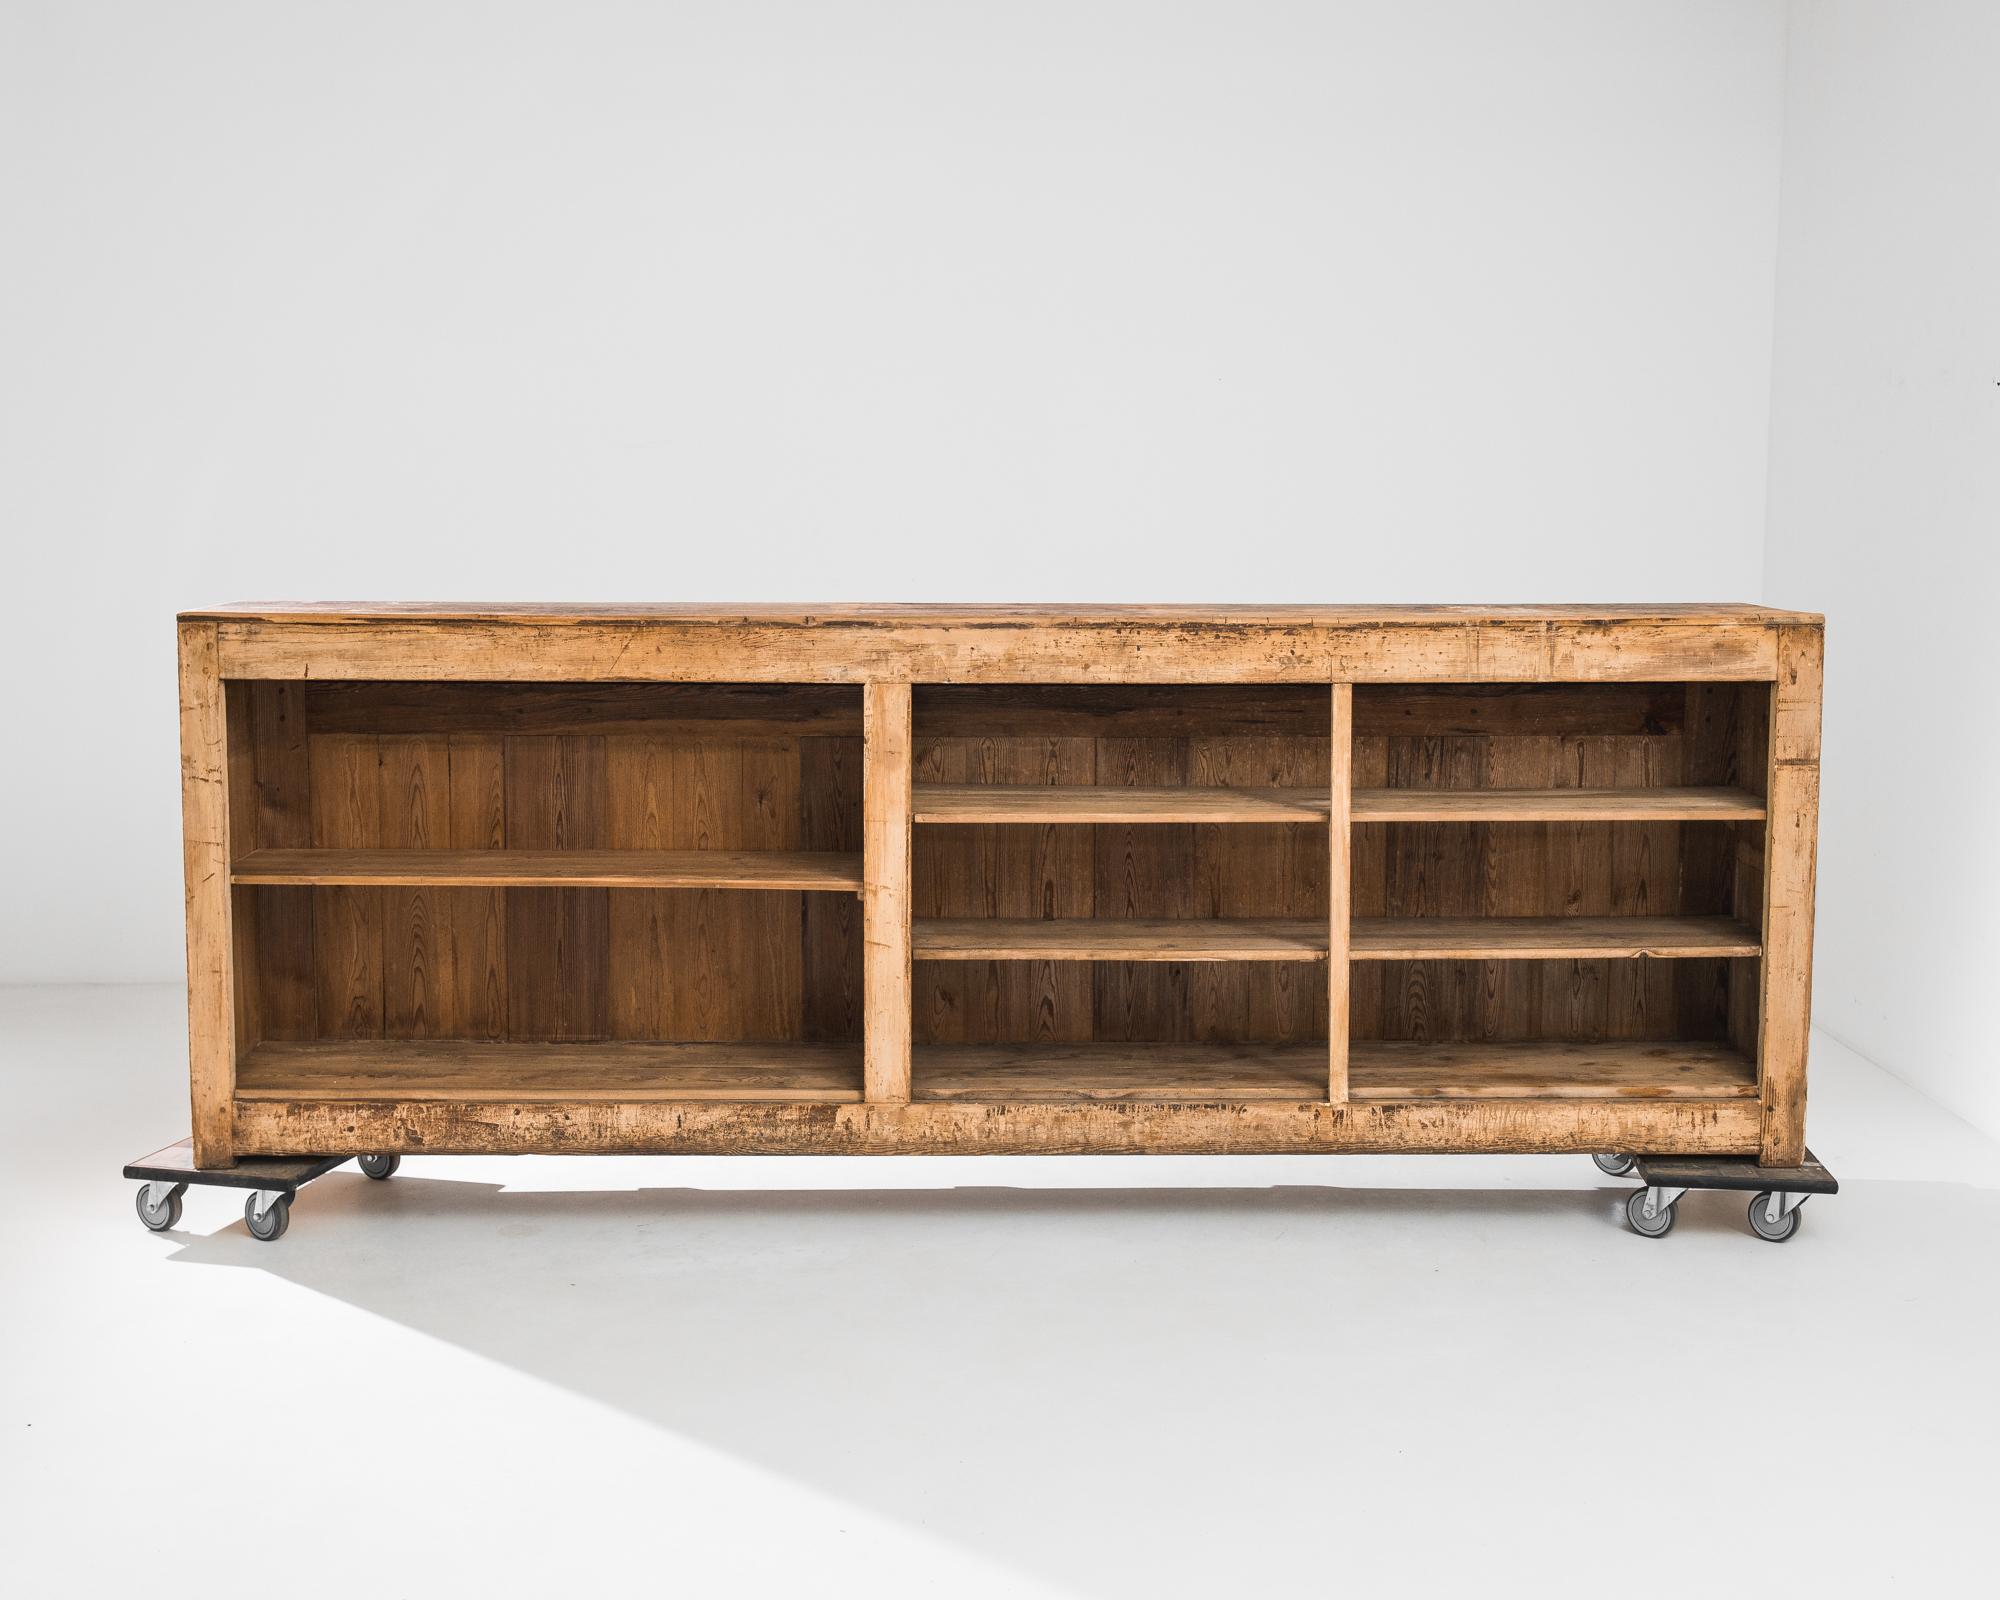 A wood patinated bar from France, produced circa 1900. A calm facade of recessed rectangular panels flanked by fluted pilasters topped by a ten foot long counter. An open back with five shelves of varying heights allows room for all materials needed